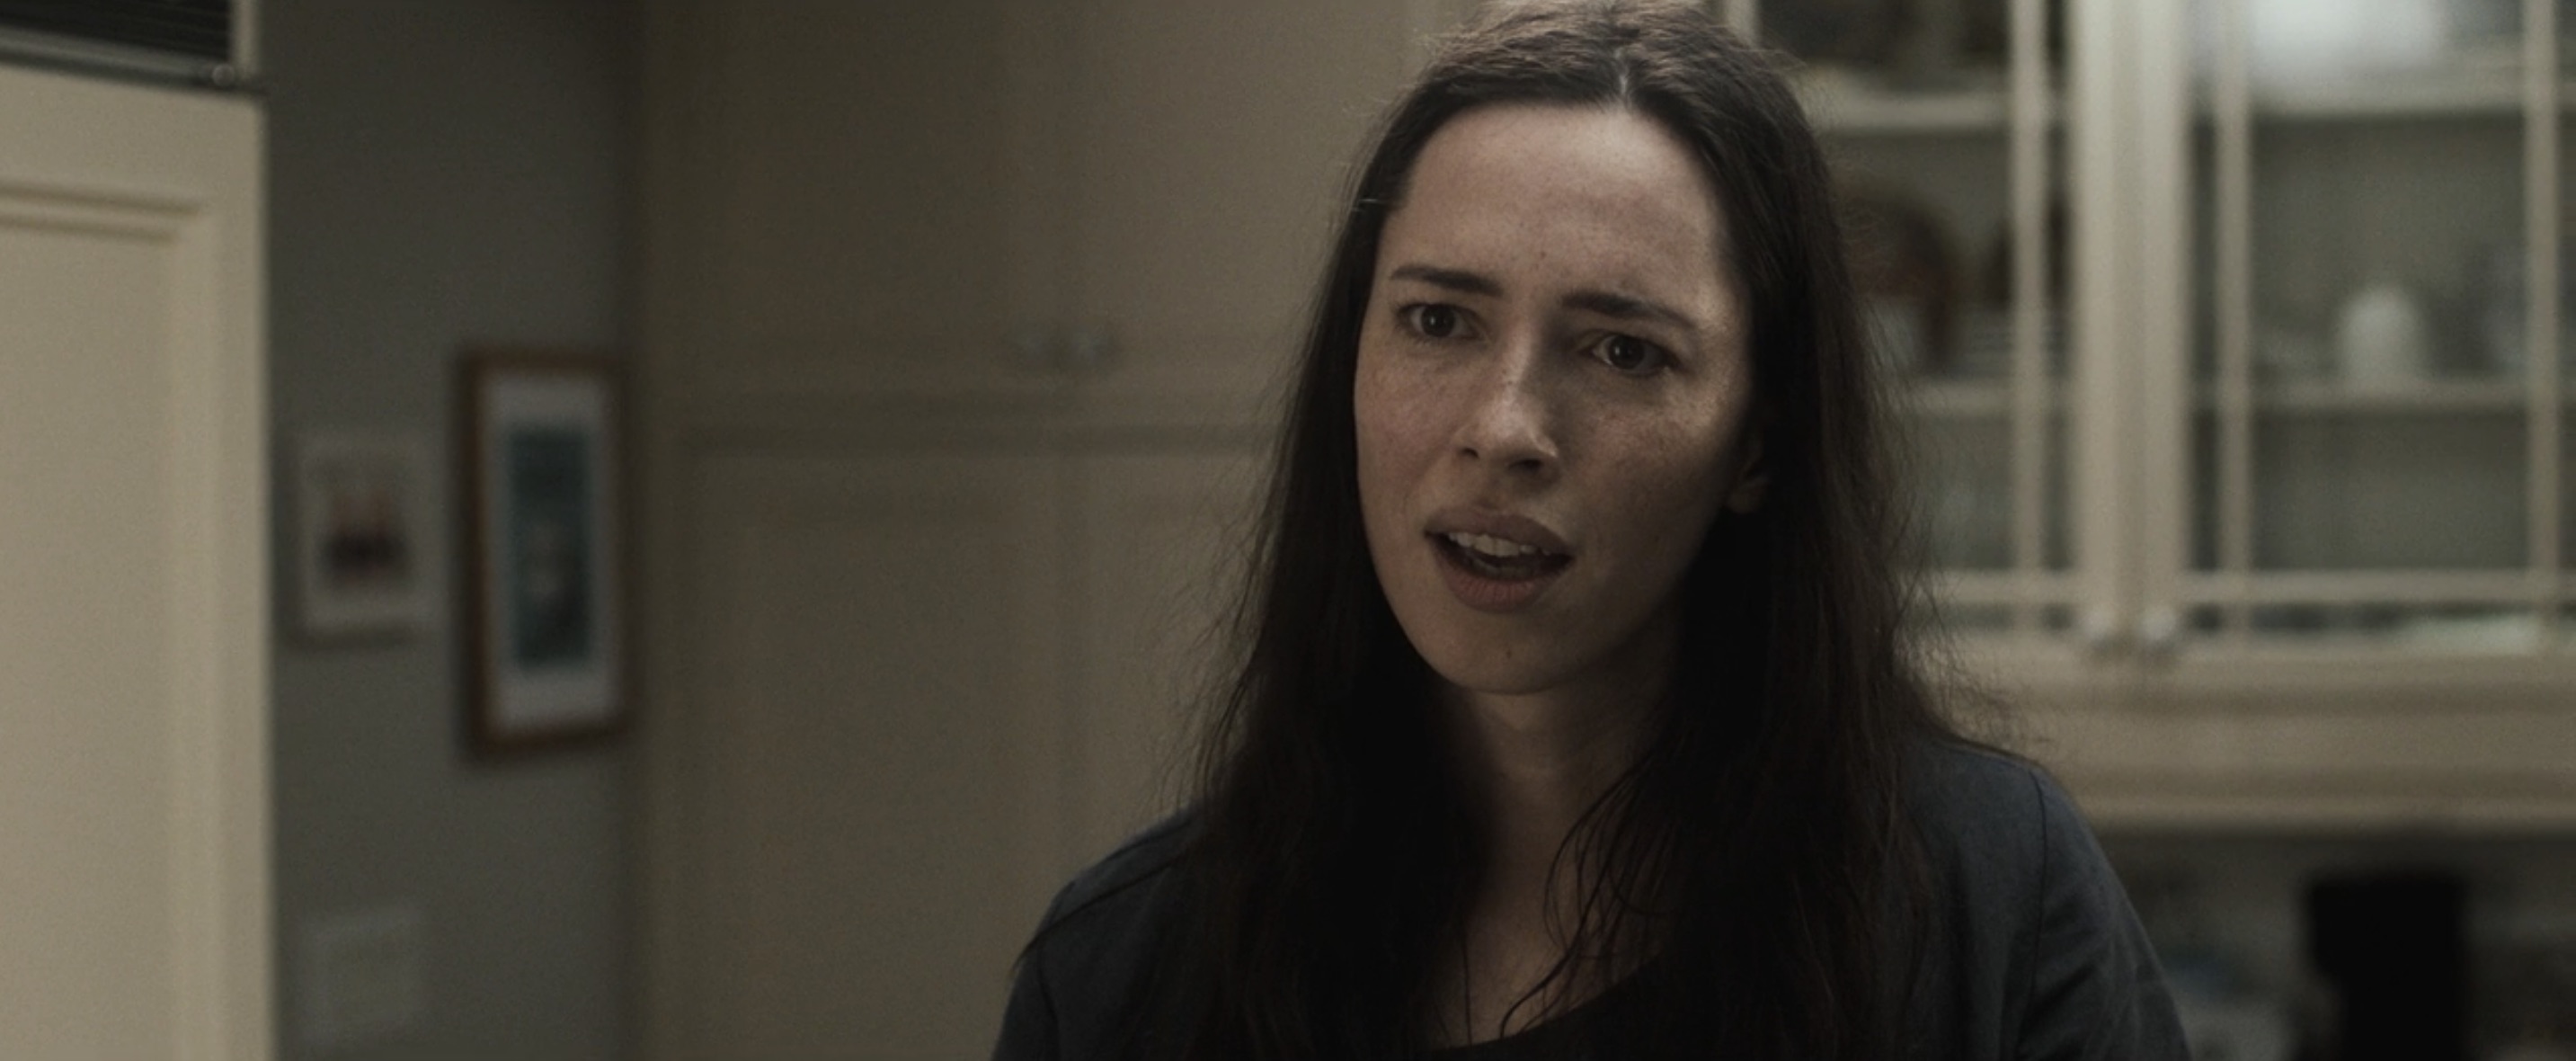 The Night House - Rebecca Hall as Beth